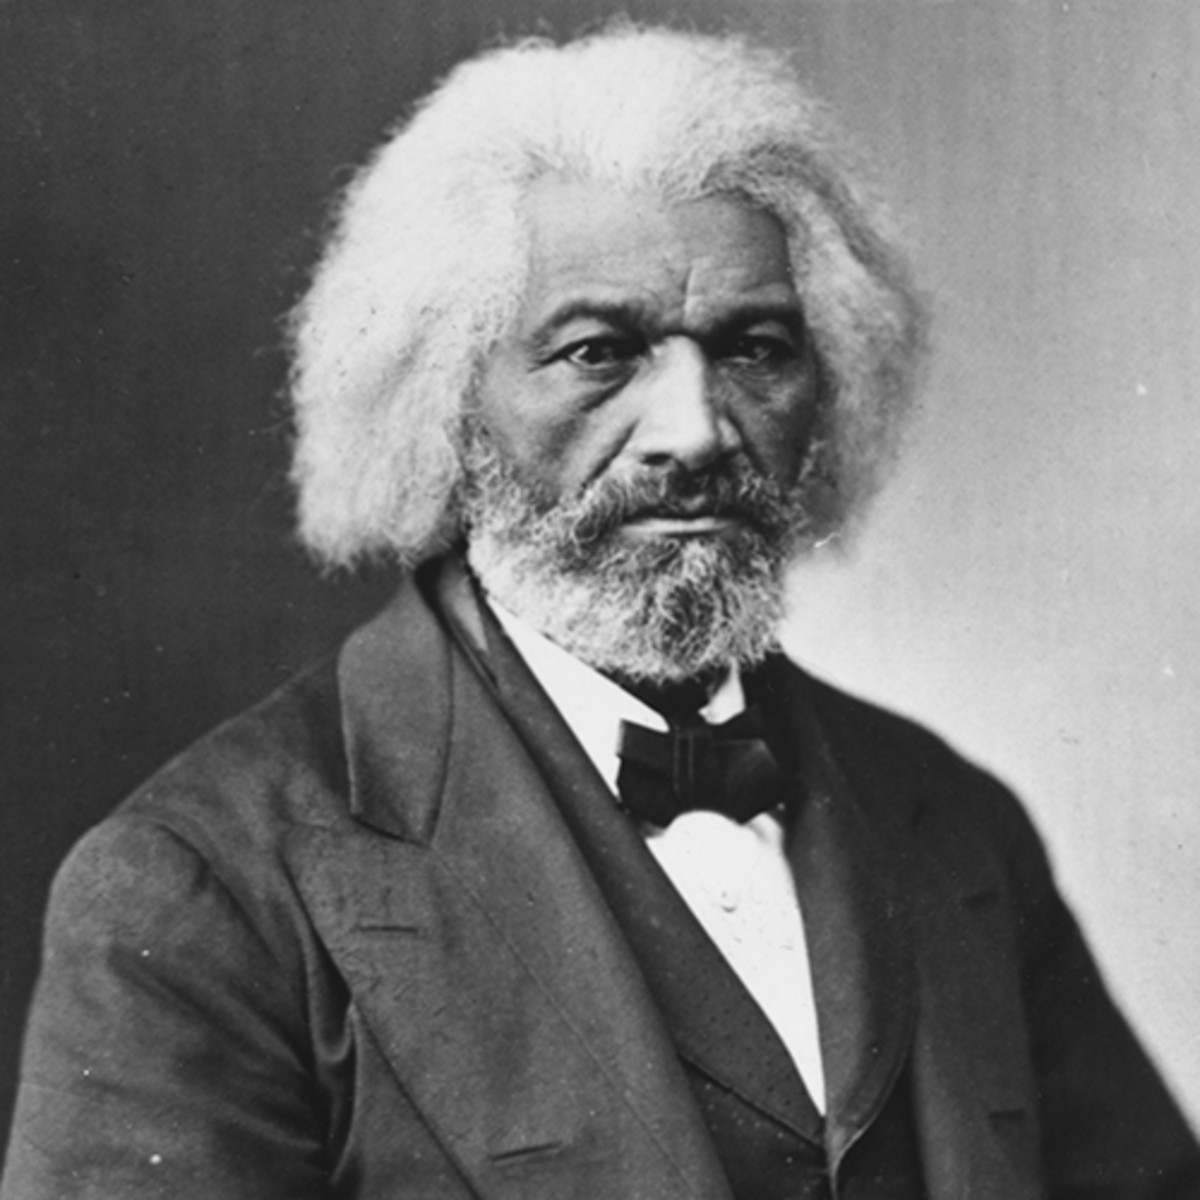 Frederick Douglass tired to tell Americans this when he spoke of Lincoln at a memorial, reminding them that, at best, that Lincoln was a "step-father" to Black Americans.He warned against our instinct to make him a messiah or to believe white supremacy was over.24/